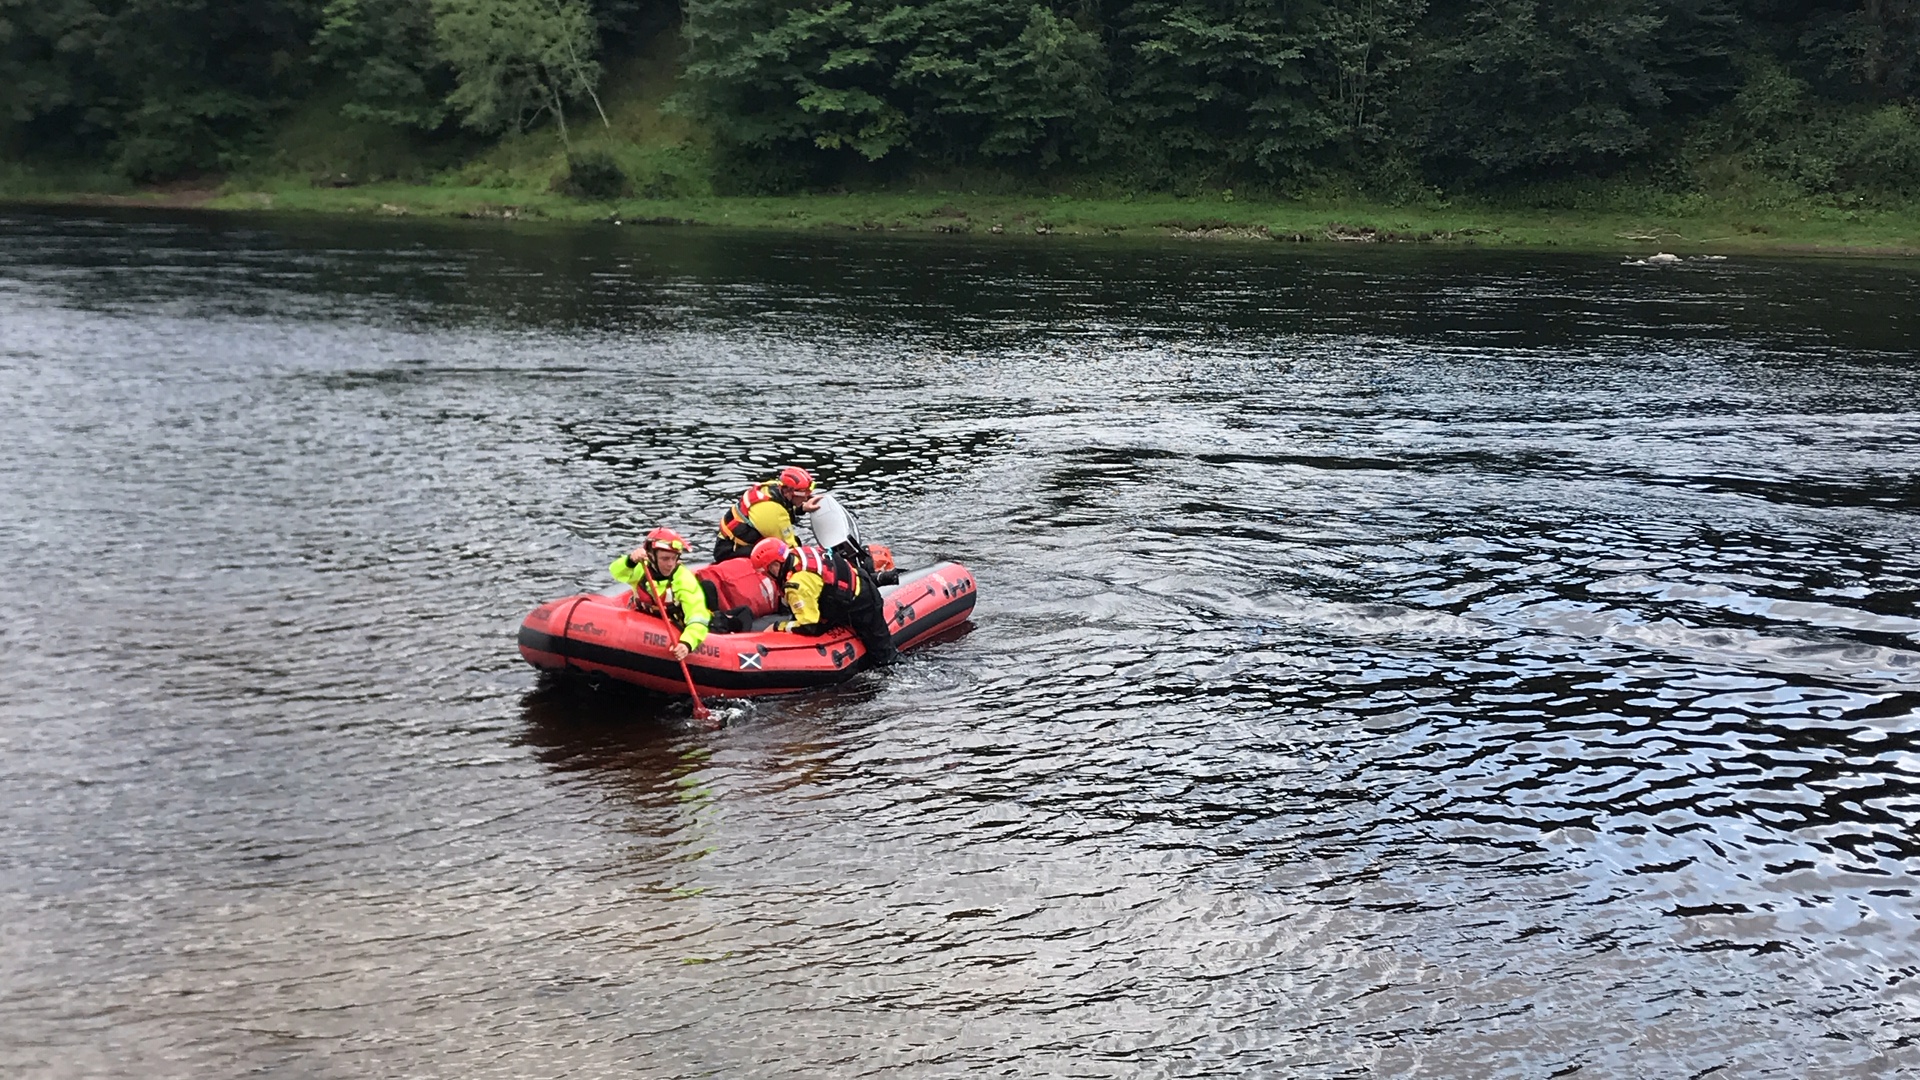 A water rescue team for the Scottish Fire and Rescue Service paddles on the River Tay near Stanley.